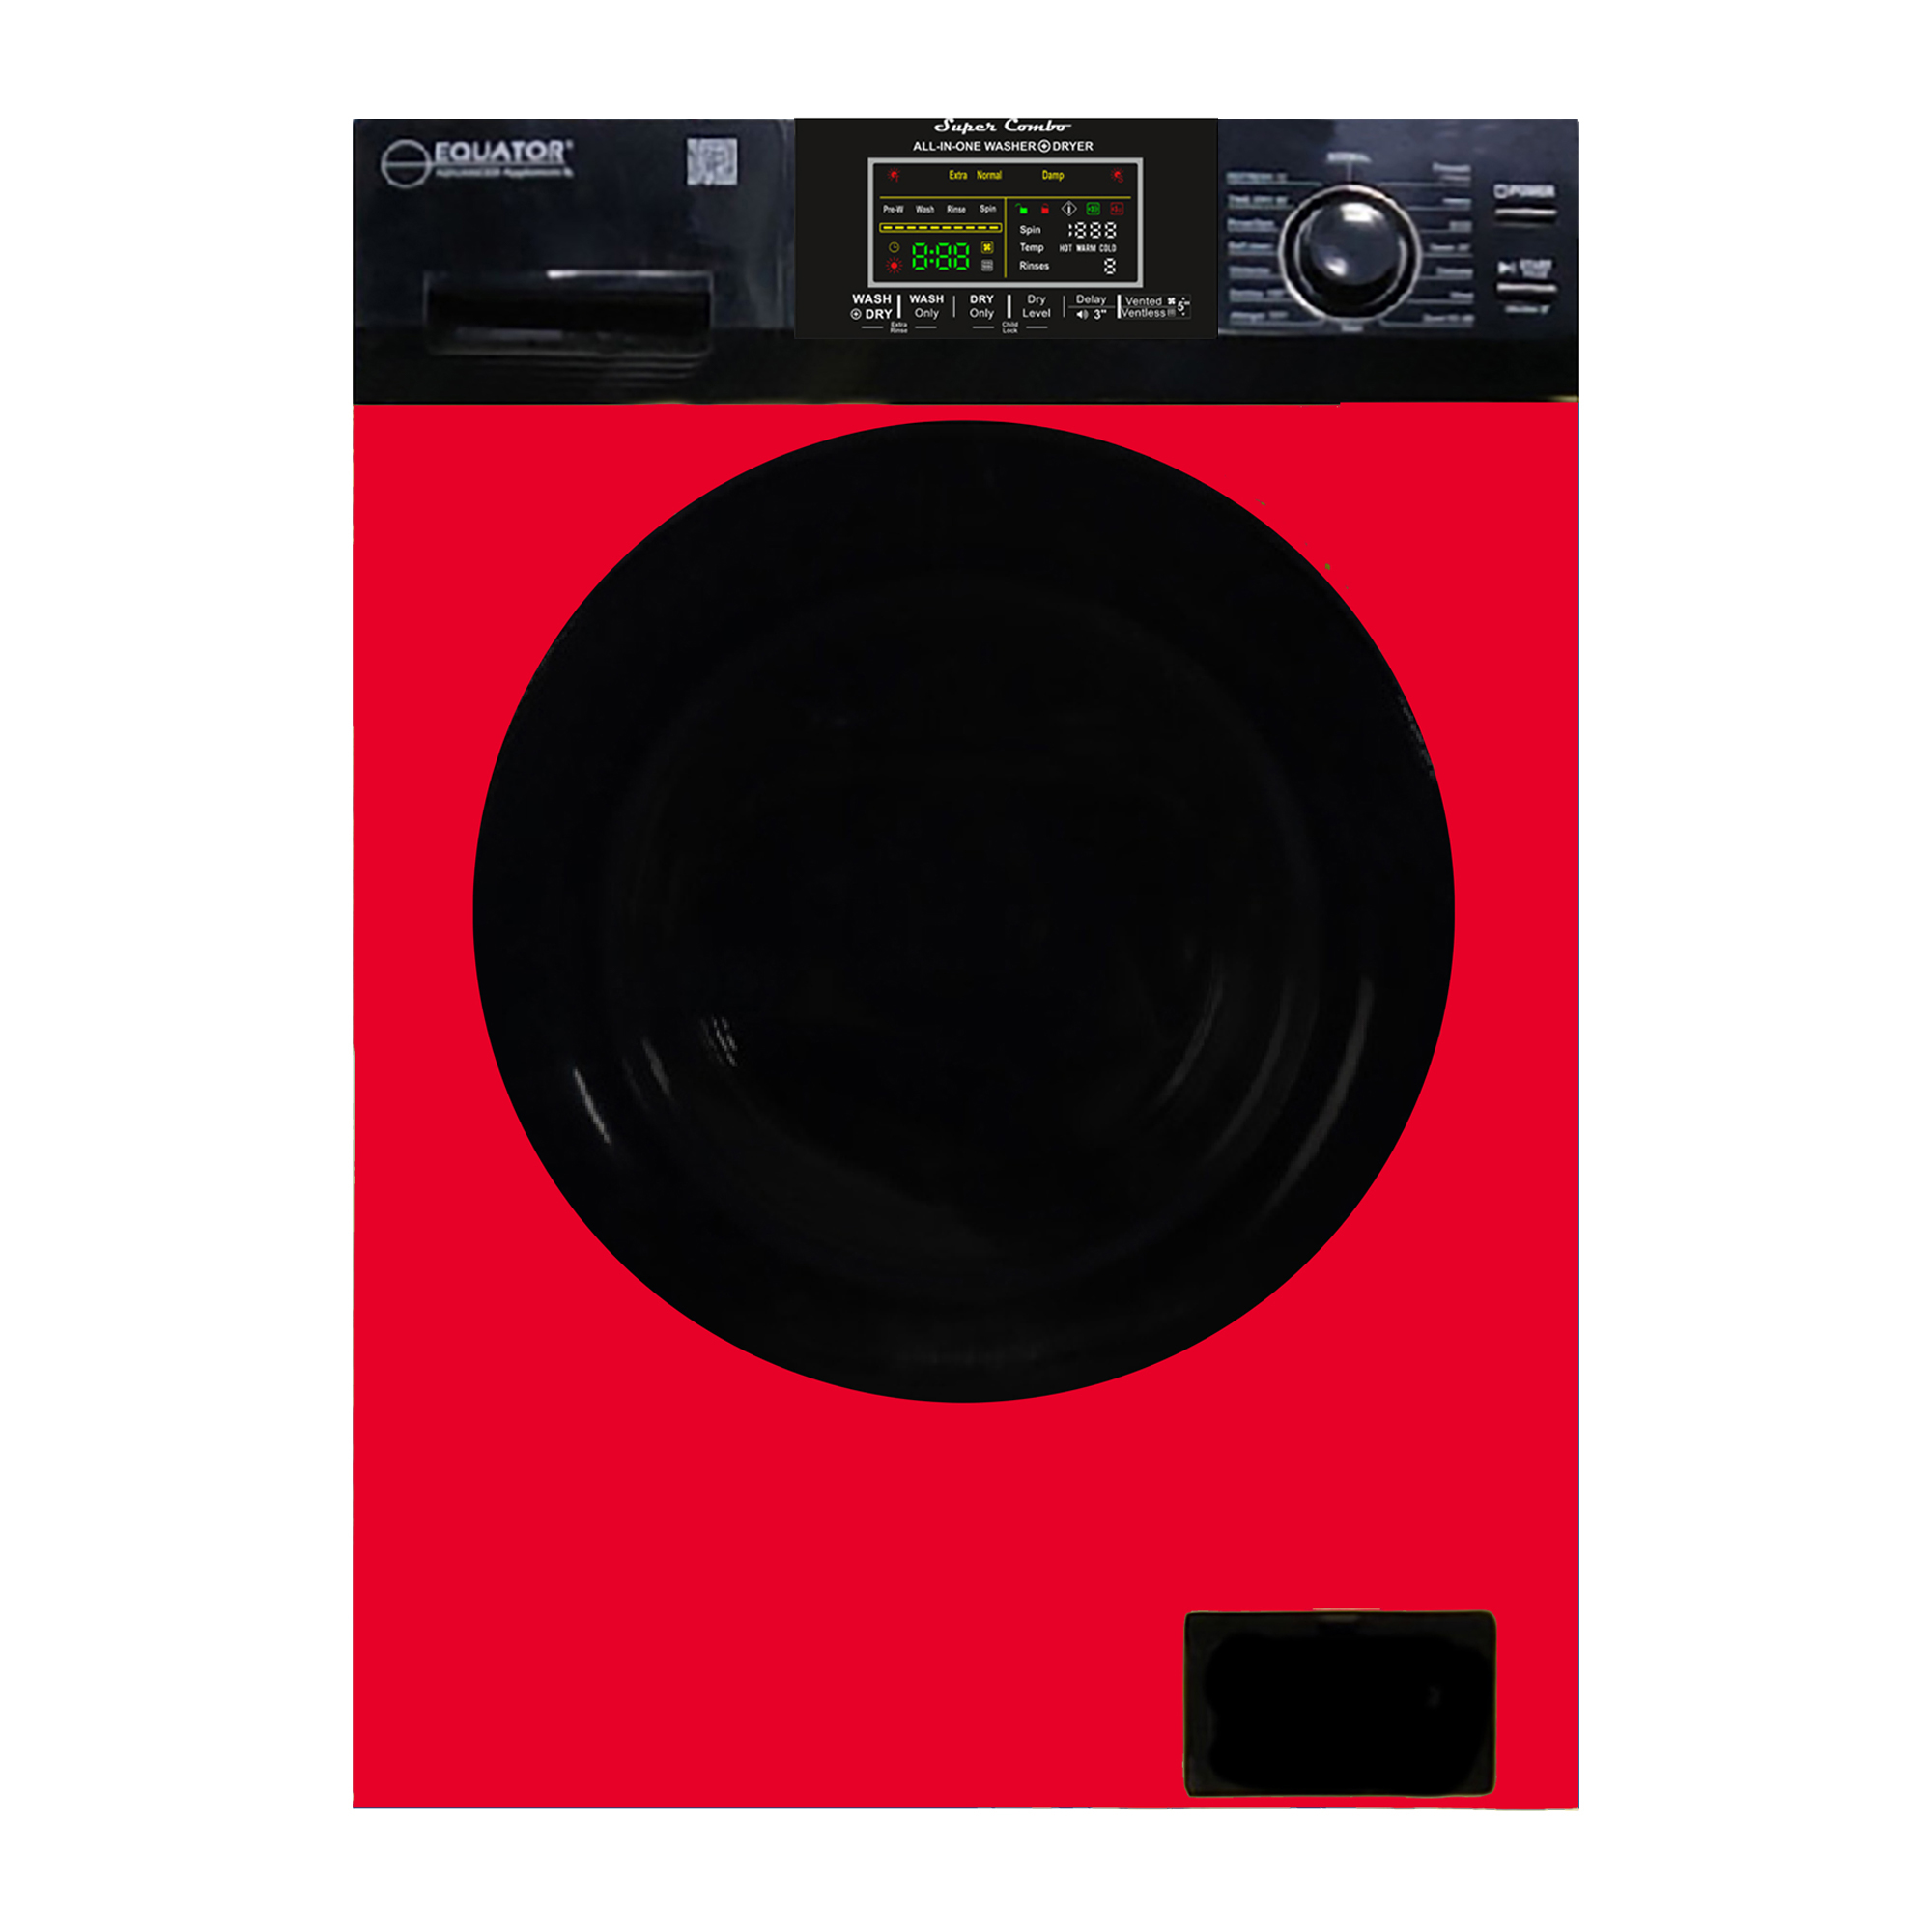 Equator Digital Compact 110V Vented/Ventless 18 lbs Combo Washer Dryer 1400 RPM (Red/Black)